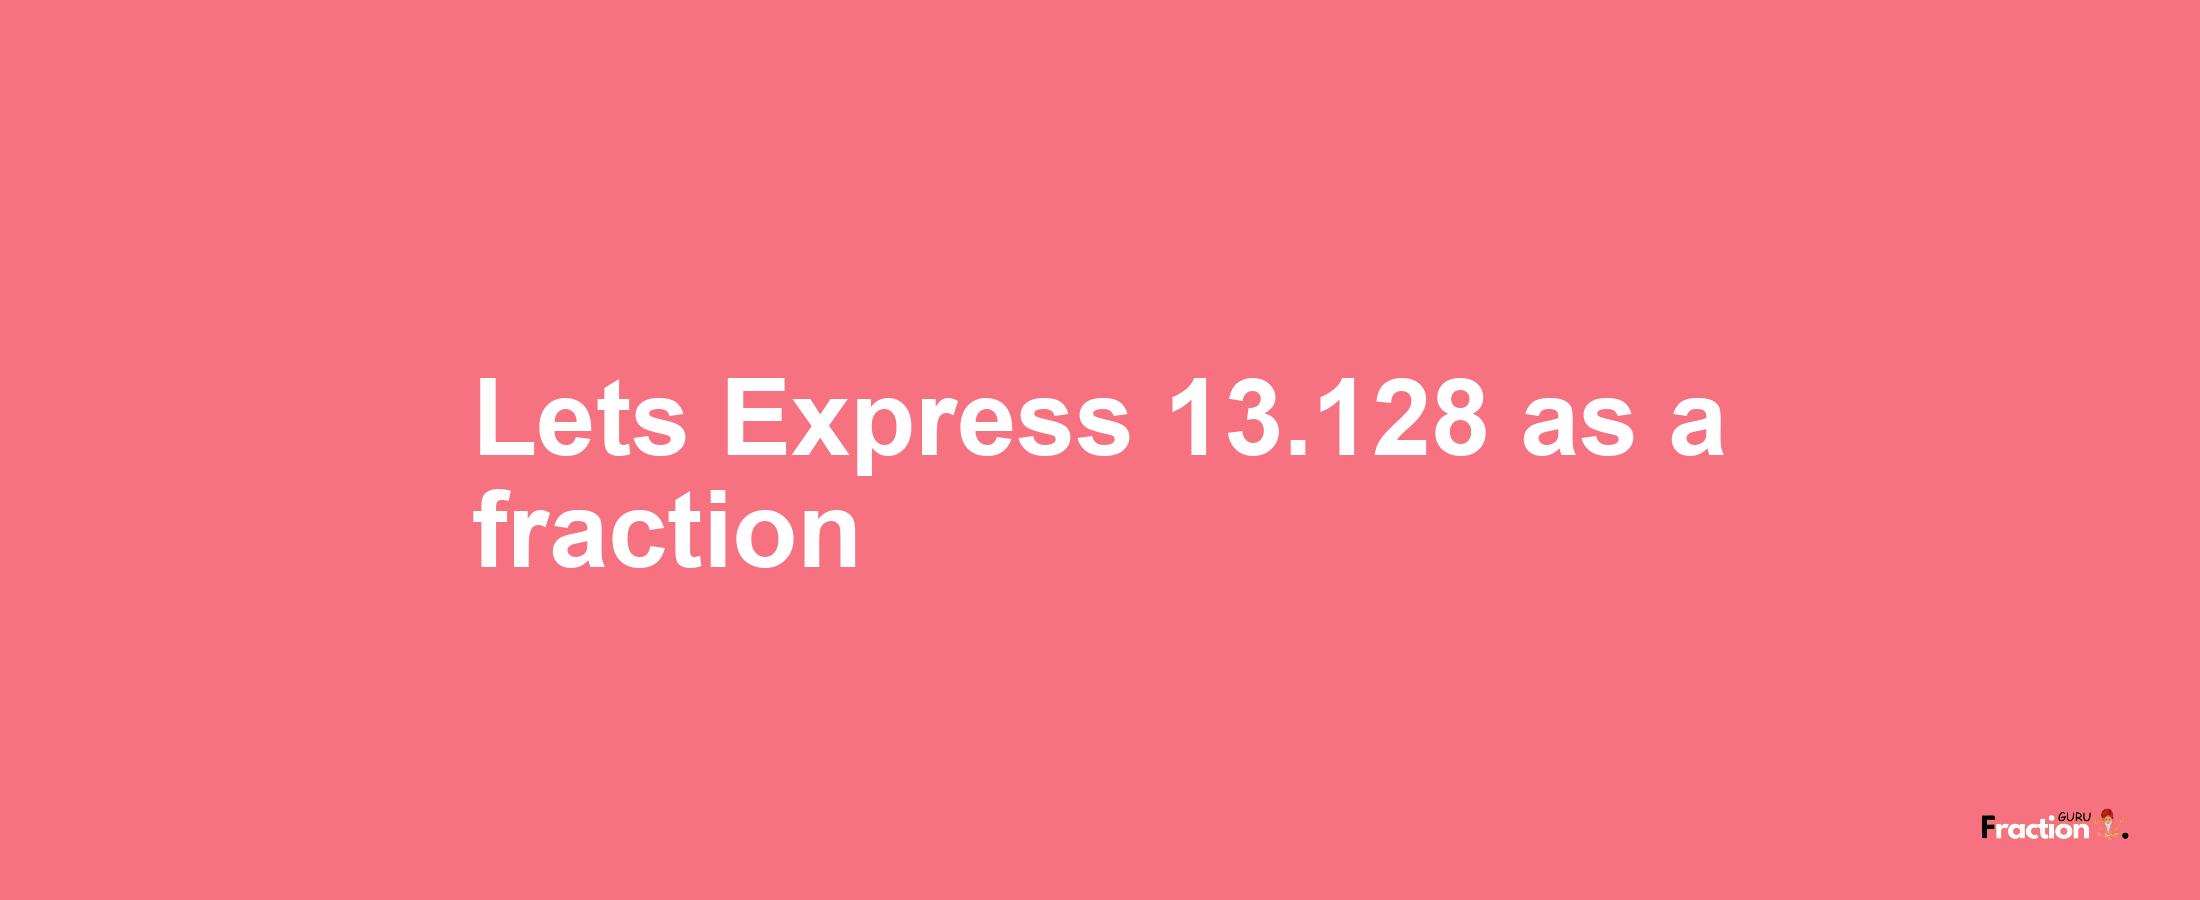 Lets Express 13.128 as afraction